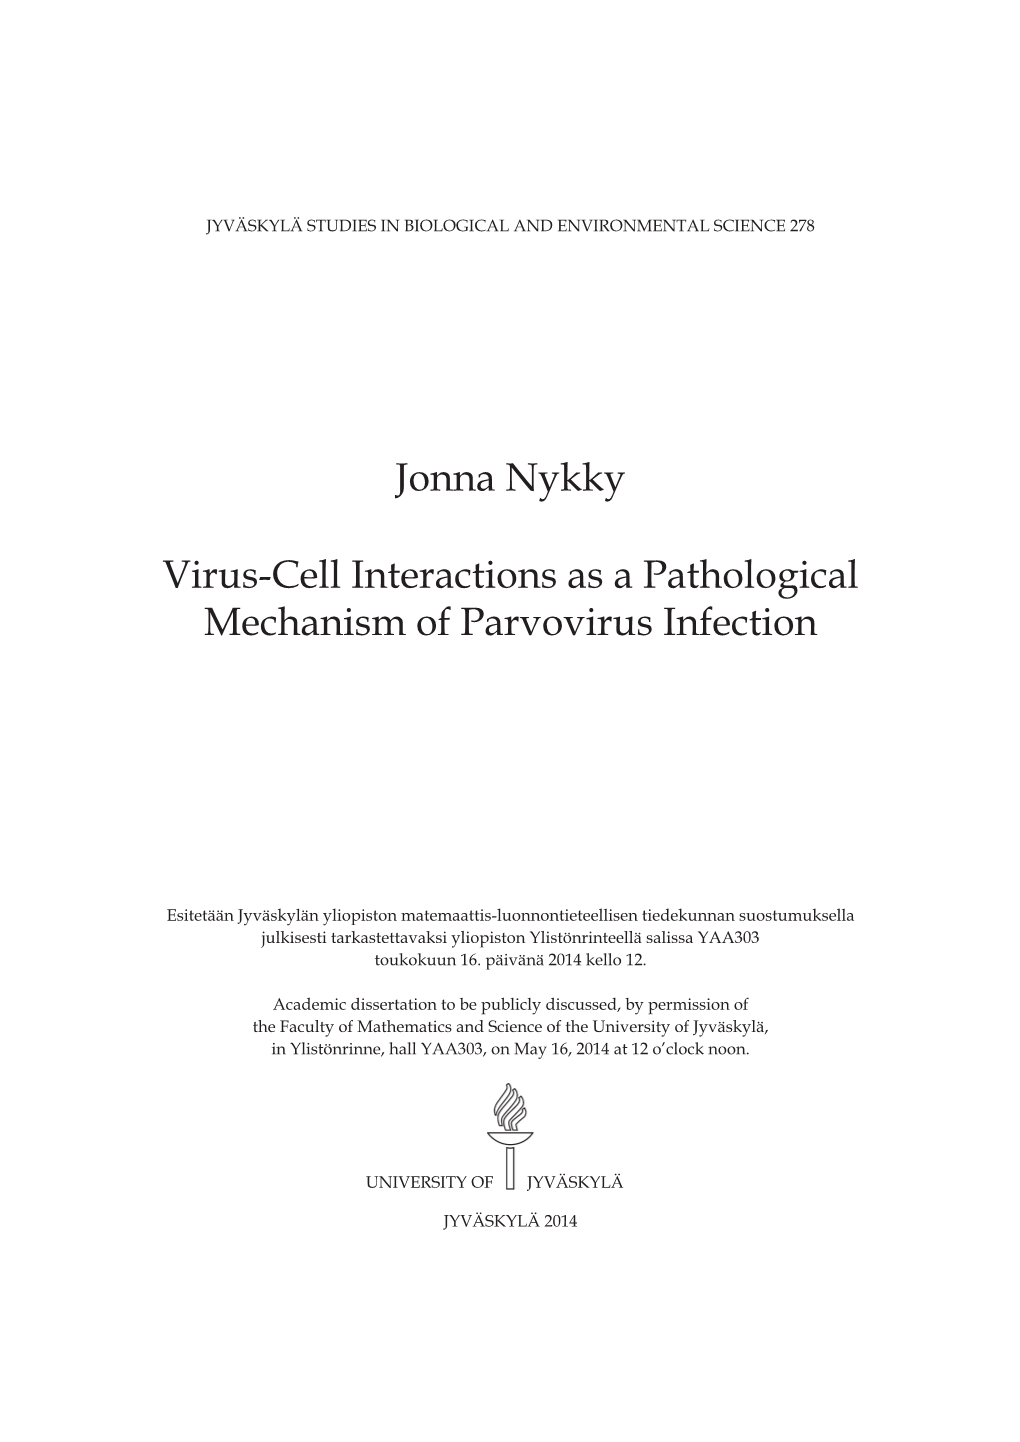 Virus-Cell Interactions As a Pathological Mechanism of Parvovirus Infection